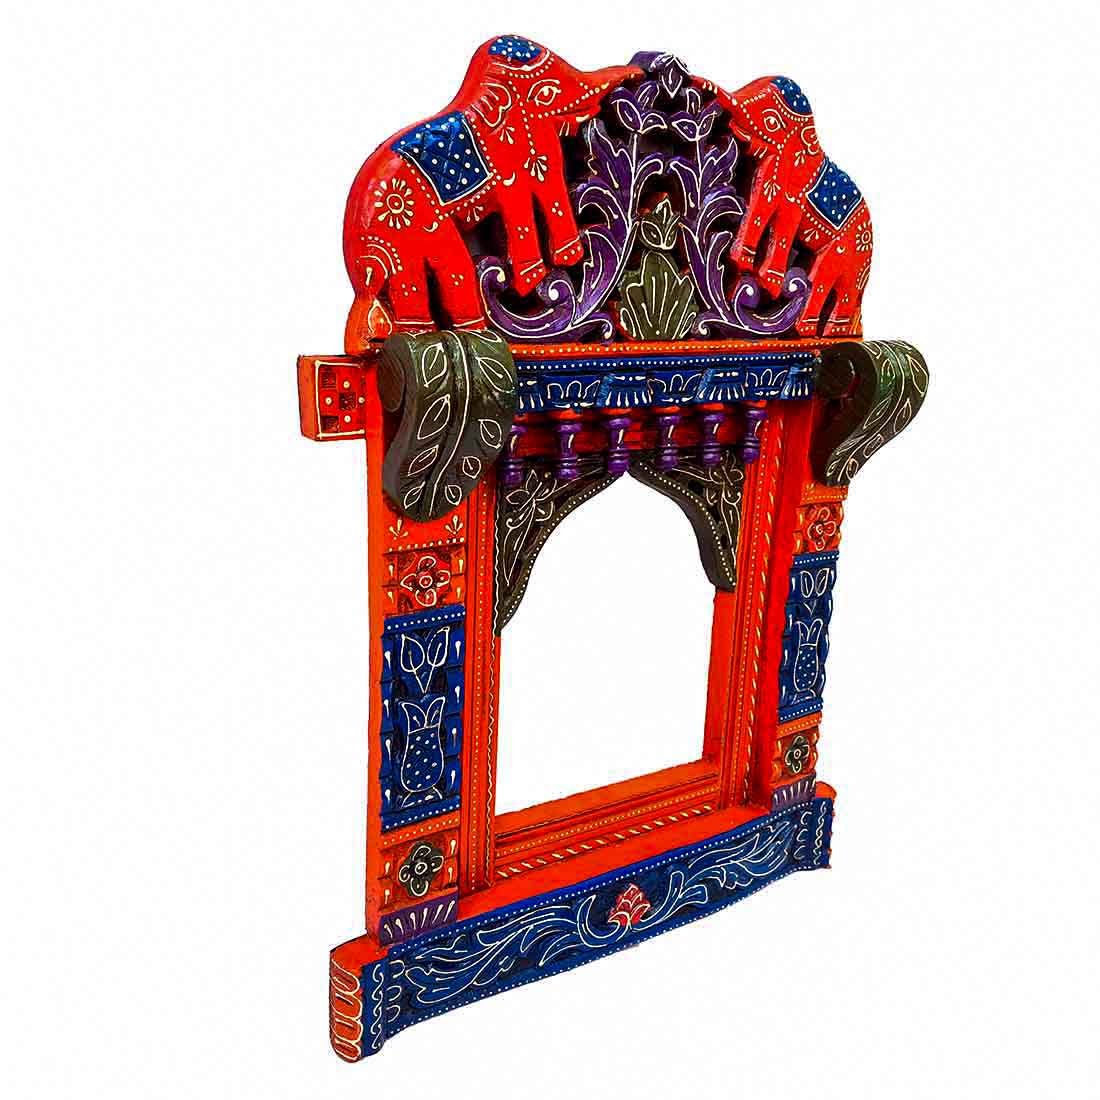 Elephant Design Jharokha -  Wall Decor - For Home Decor & Gifts -  27 Inches - ApkaMart